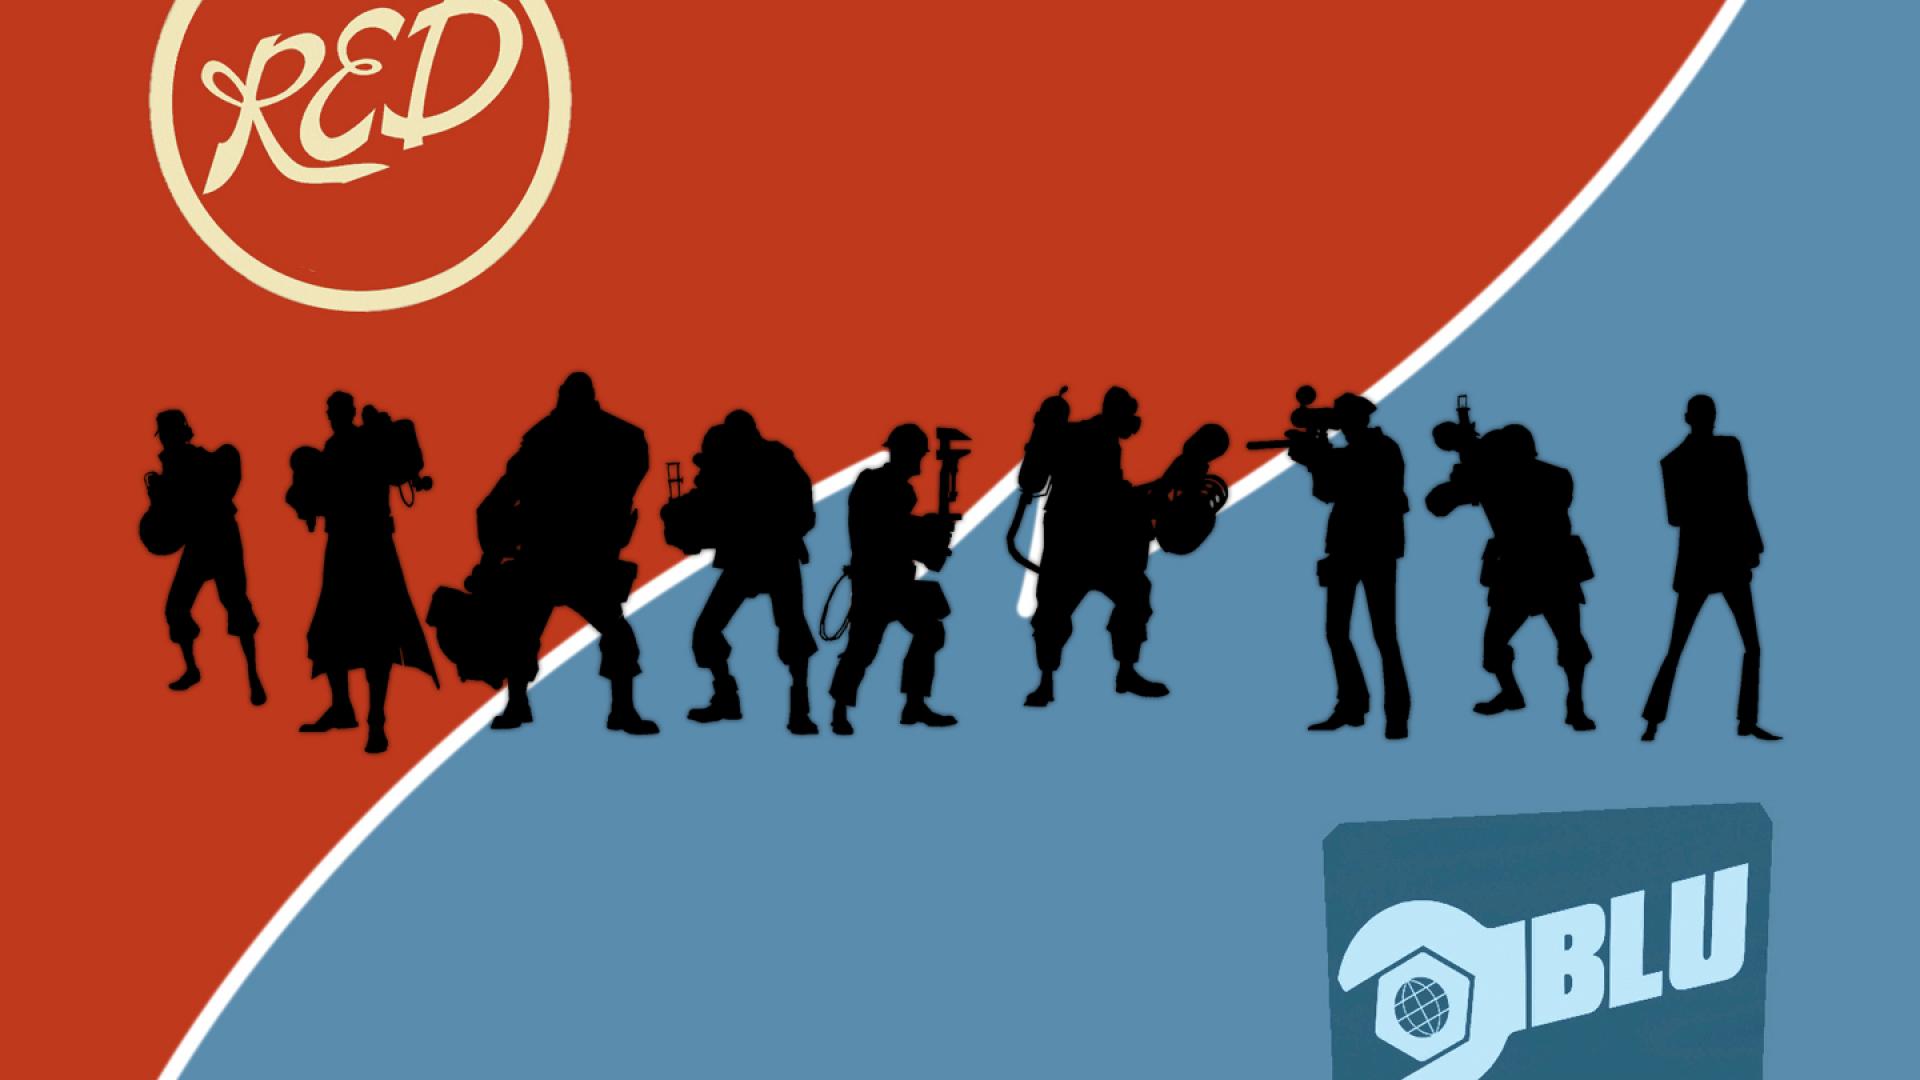 1920x1080 team fortress 2 images